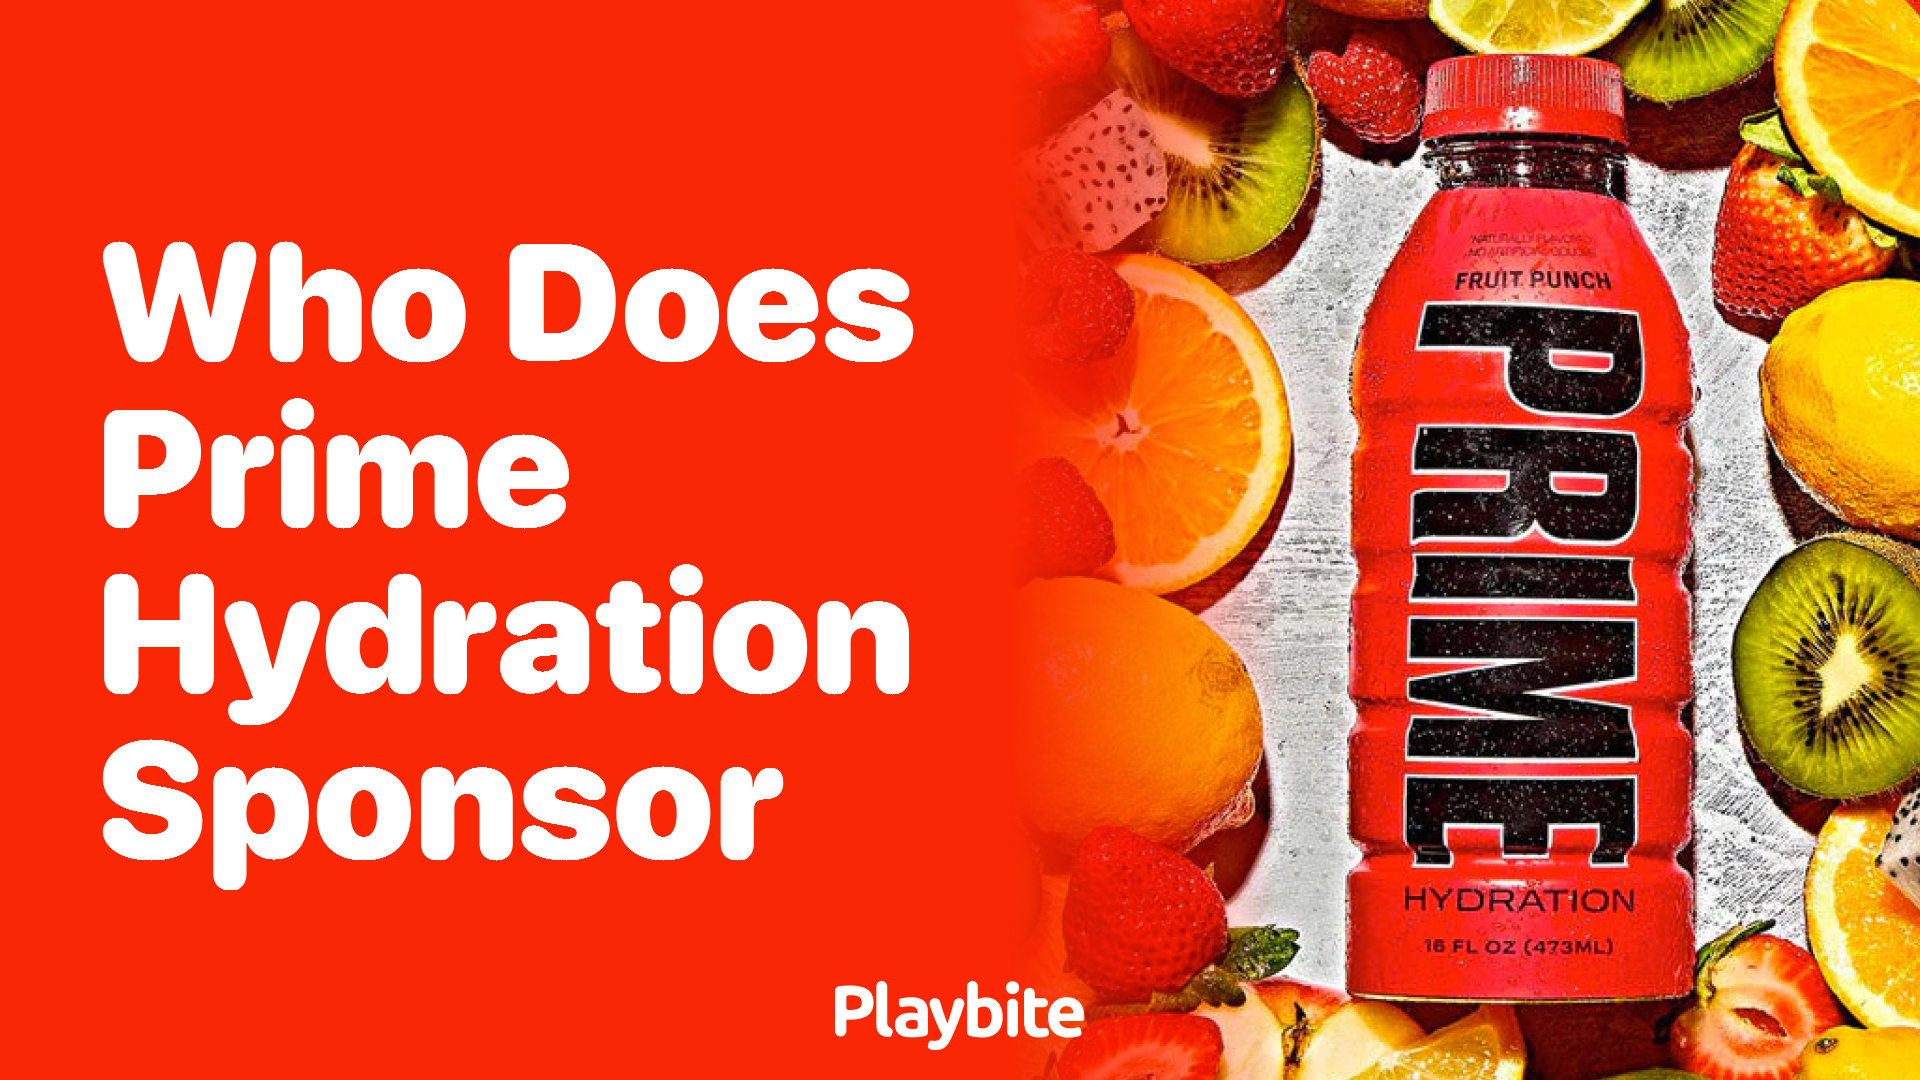 Who Does PRIME Hydration Sponsor?